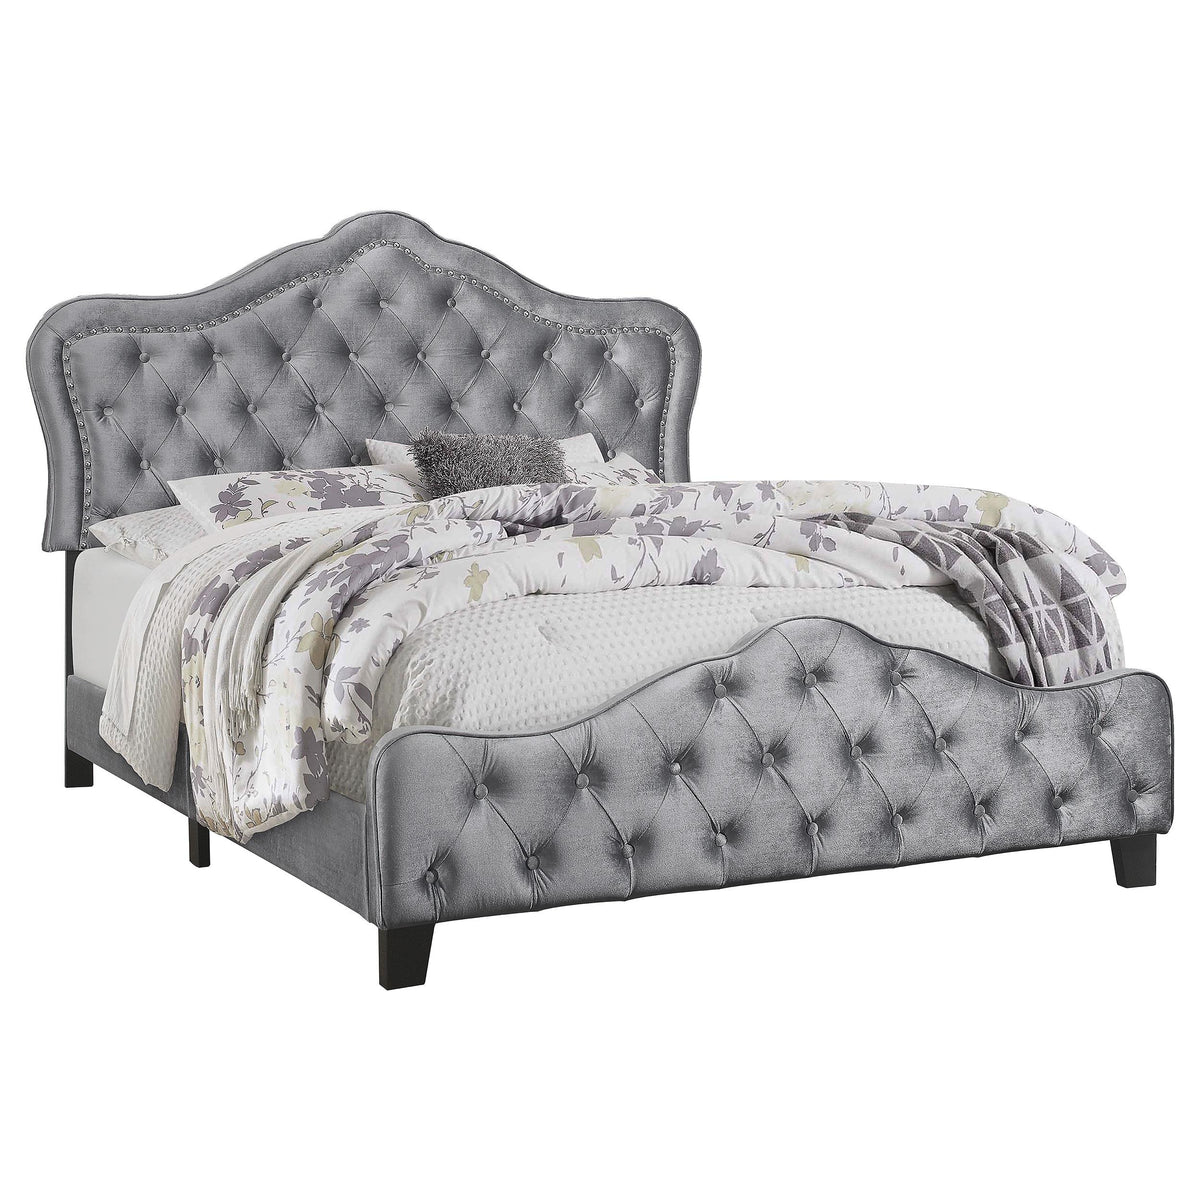 Bella Queen Upholstered Tufted Panel Bed Grey Bella Queen Upholstered Tufted Panel Bed Grey Half Price Furniture